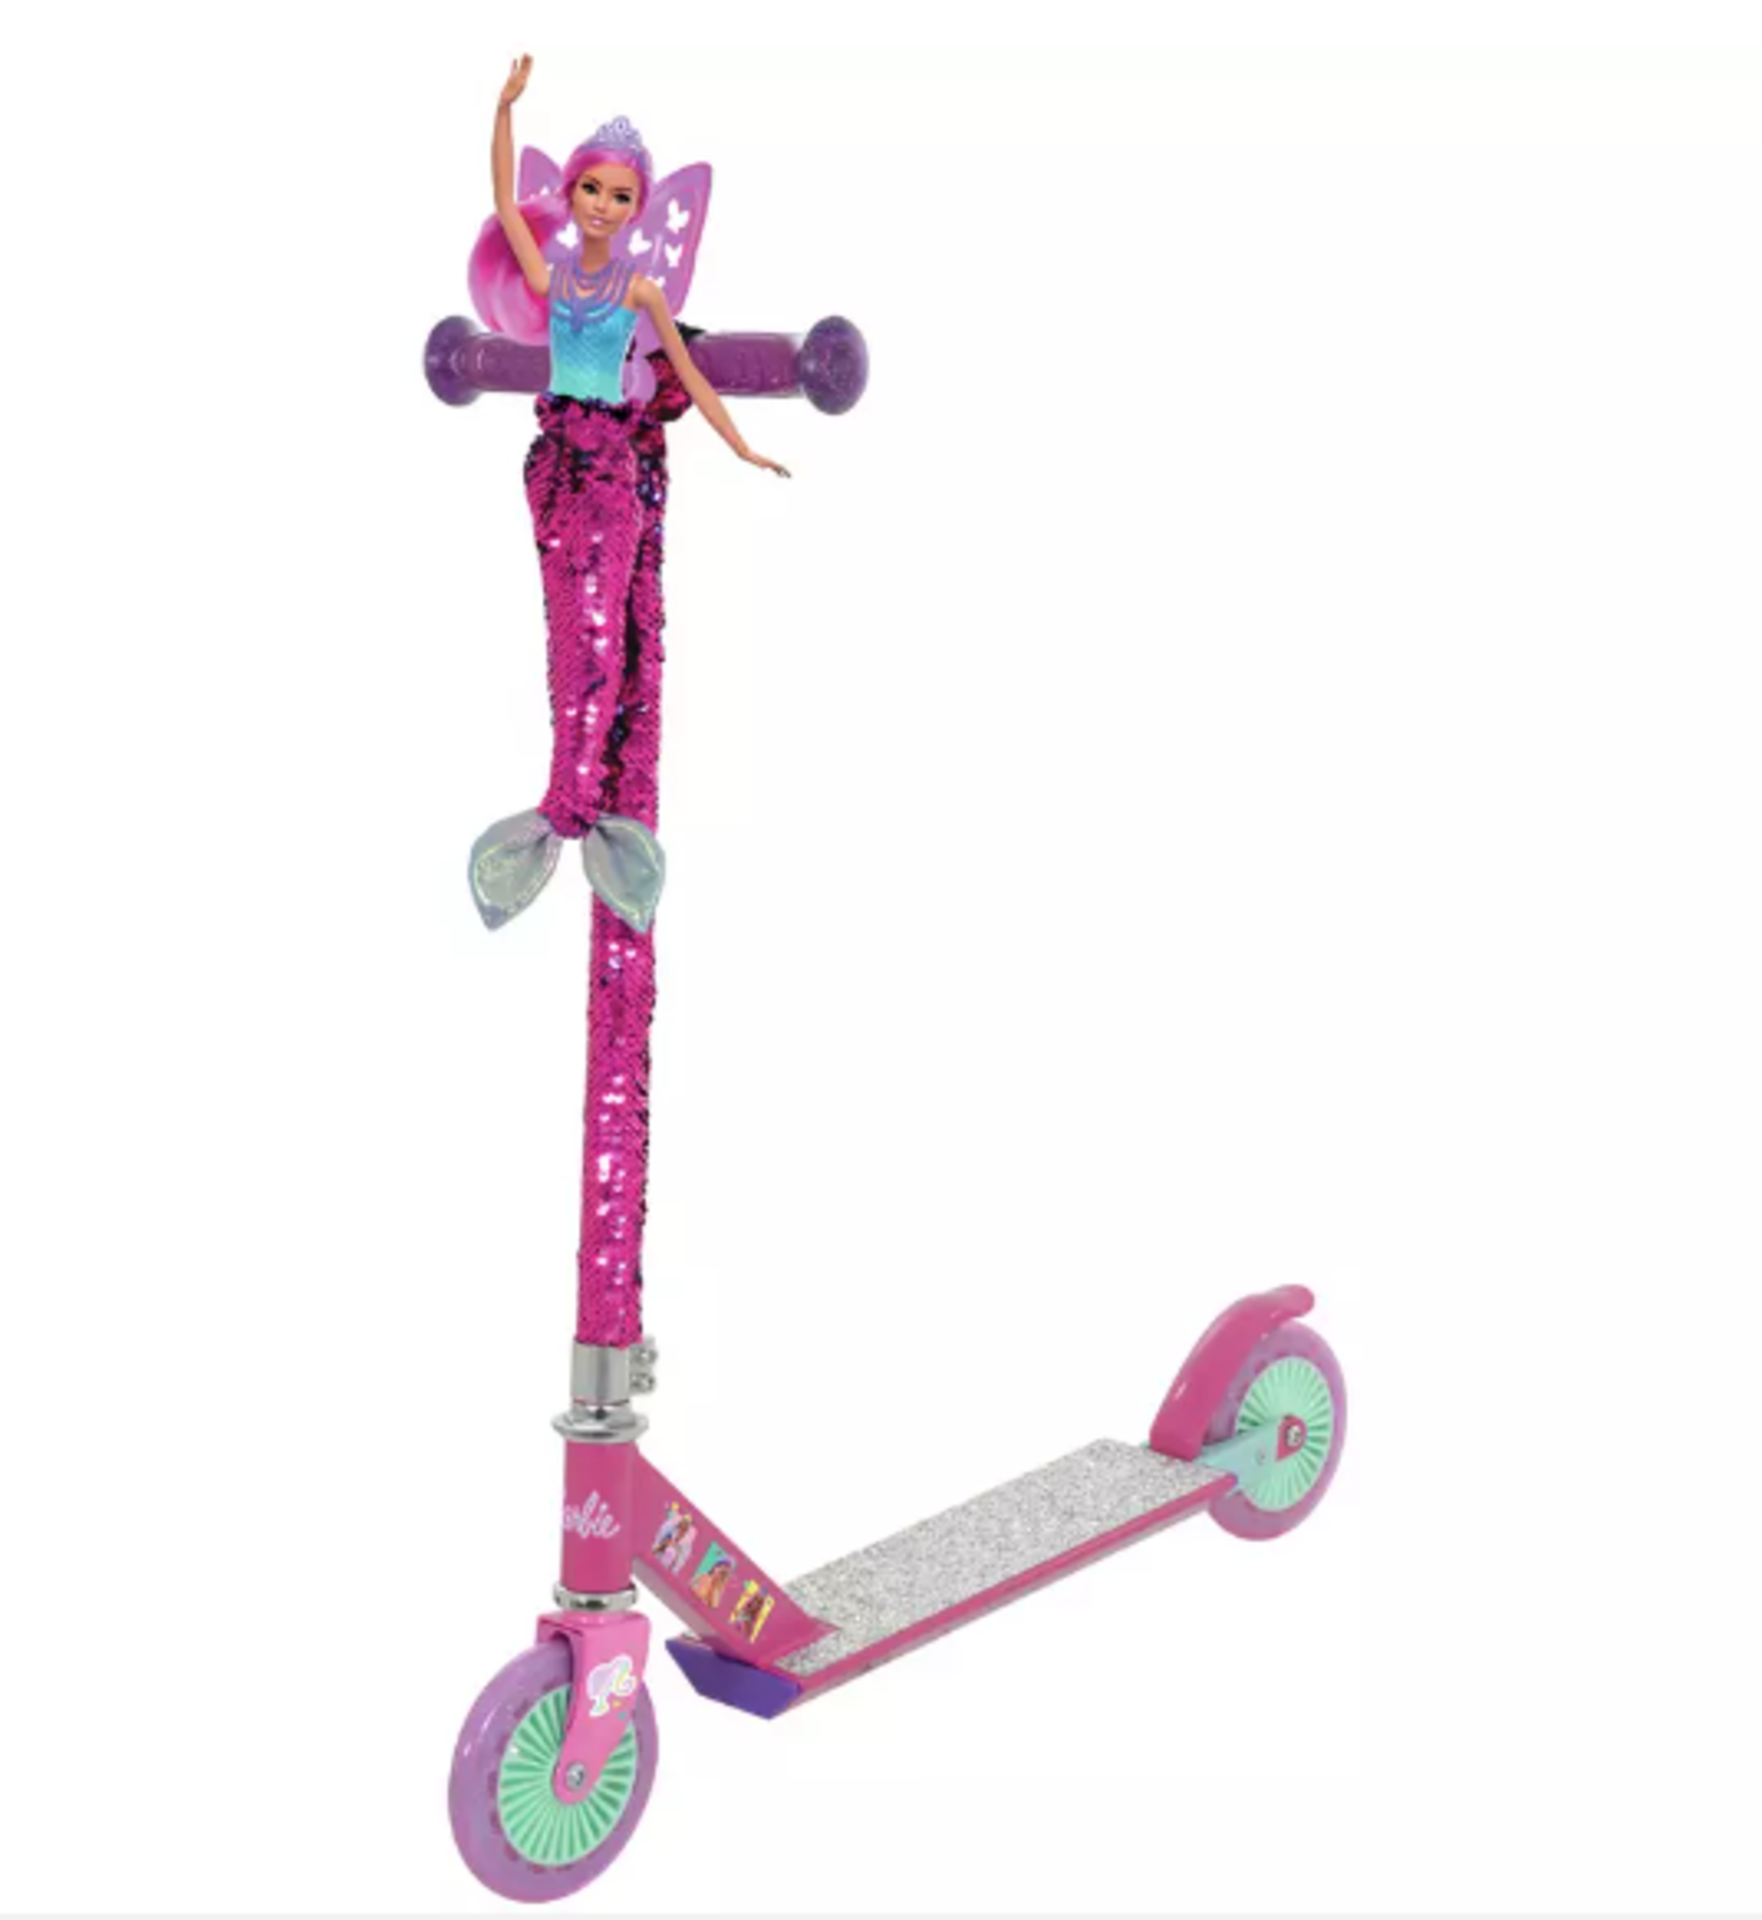 Barbie Mermaid Fixed Inline Scooter - Pink. - ER45. RRP £75.00. Let your imagination dive into a